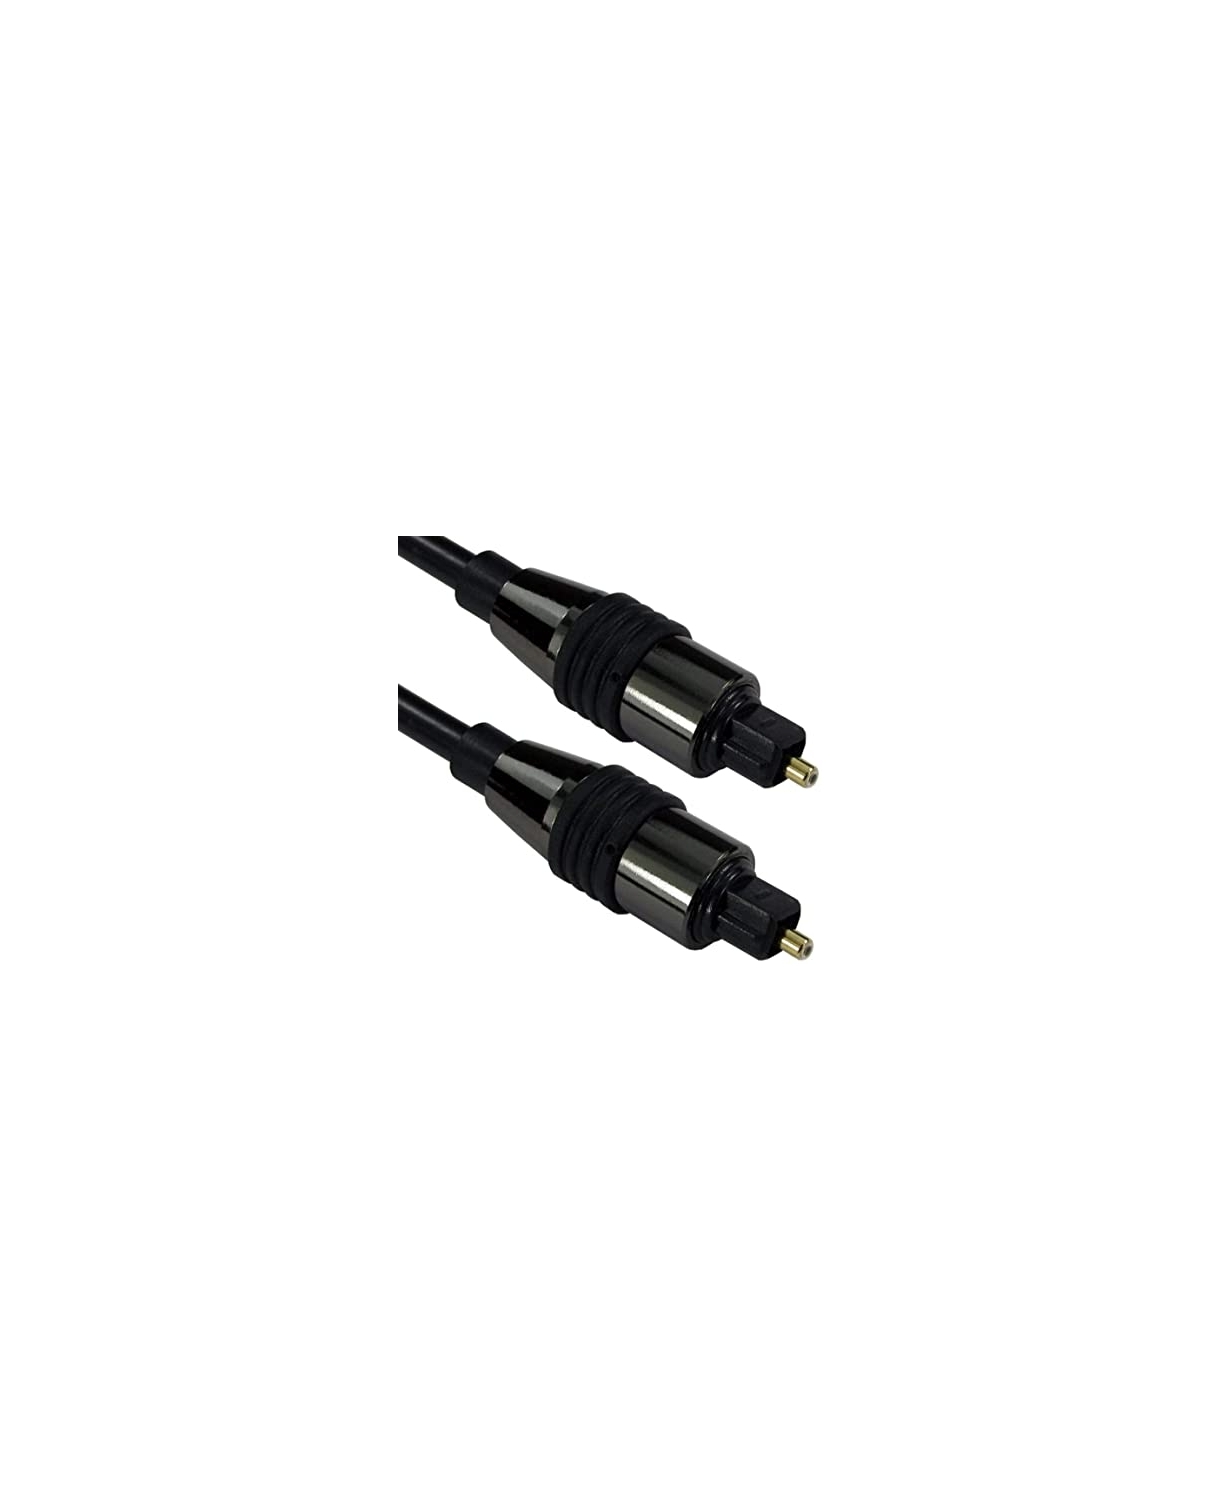 TOSLINK OPTICAL MALE TO MALE AUDIO CABLE 1.5M